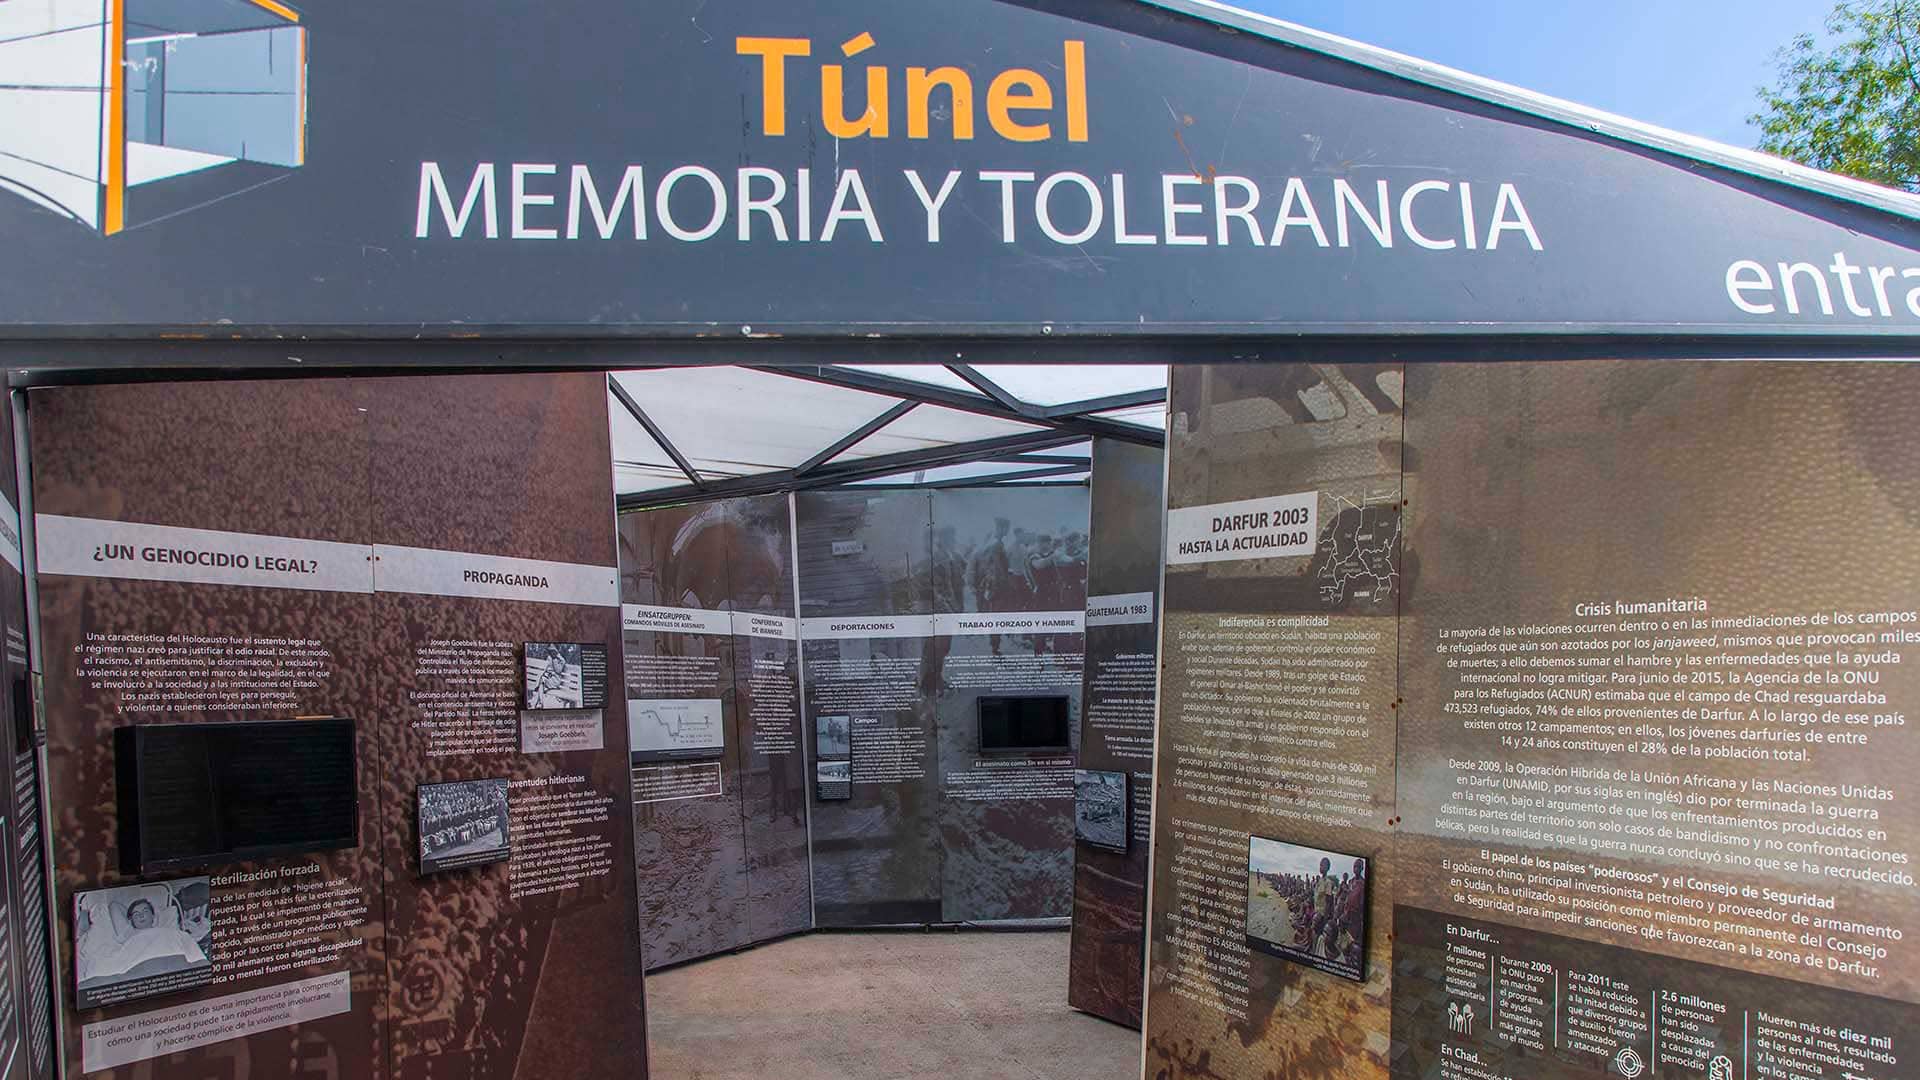 Tunnel of Memory and Tolerance